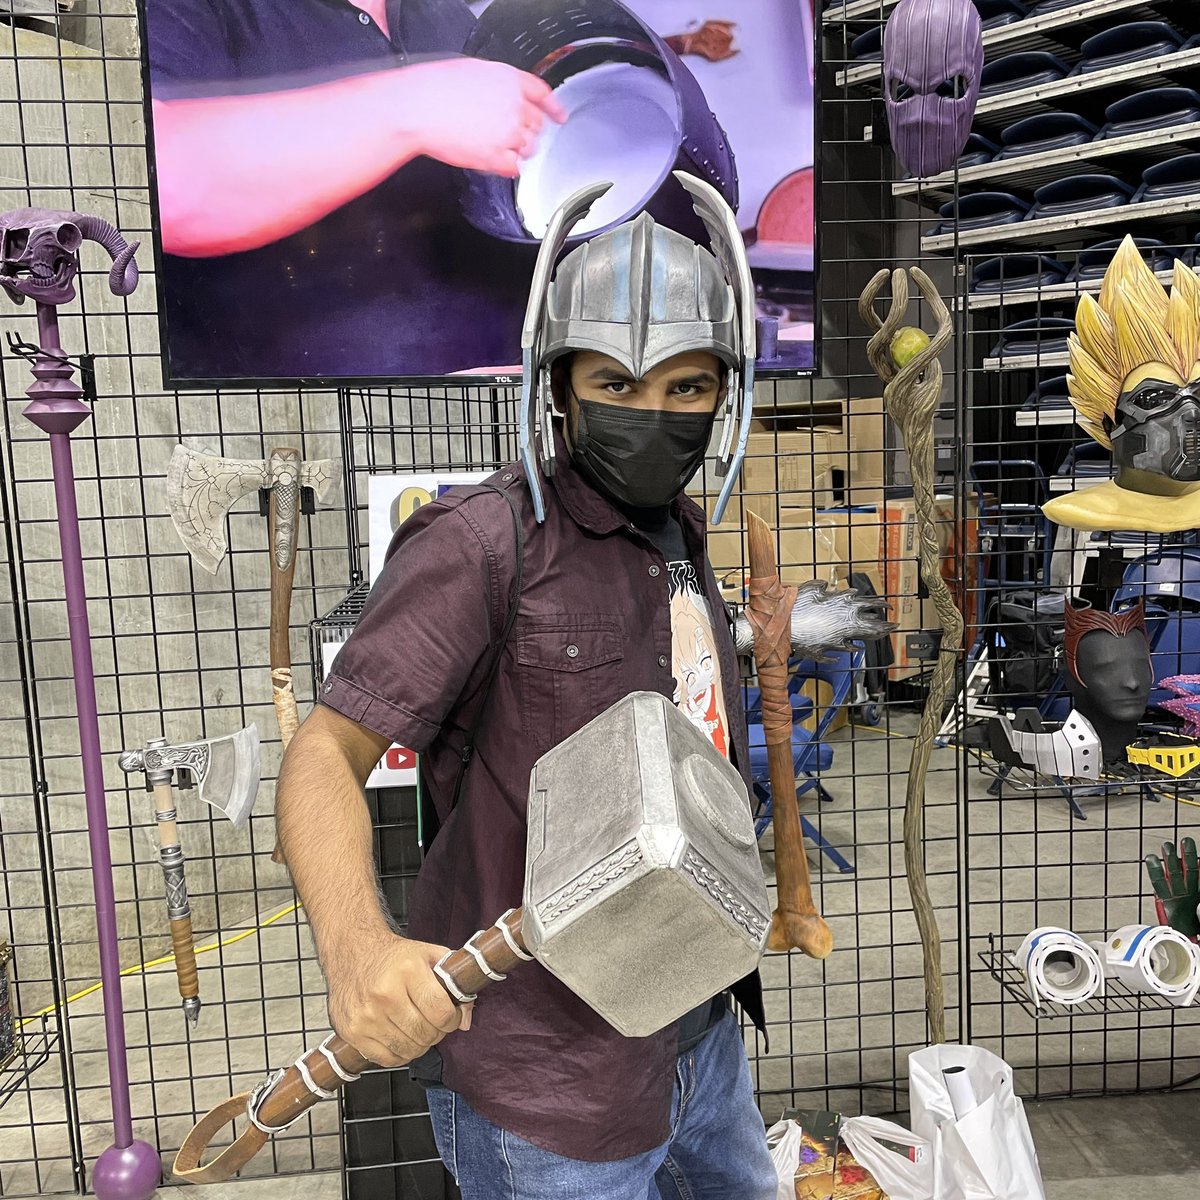 StocktonCon was a lot of fun! It was fun meeting fans like @romeo.a.27 and seeing everyone just having a great time!

@stocktoncon @marvelstudios 

#thor #thorragnarok #marvel #marvelstudios #convention #stocktoncon #comiccon #comics #comicbooks #anime #cosplay #cosplayer https://t.co/c6ijP3advE